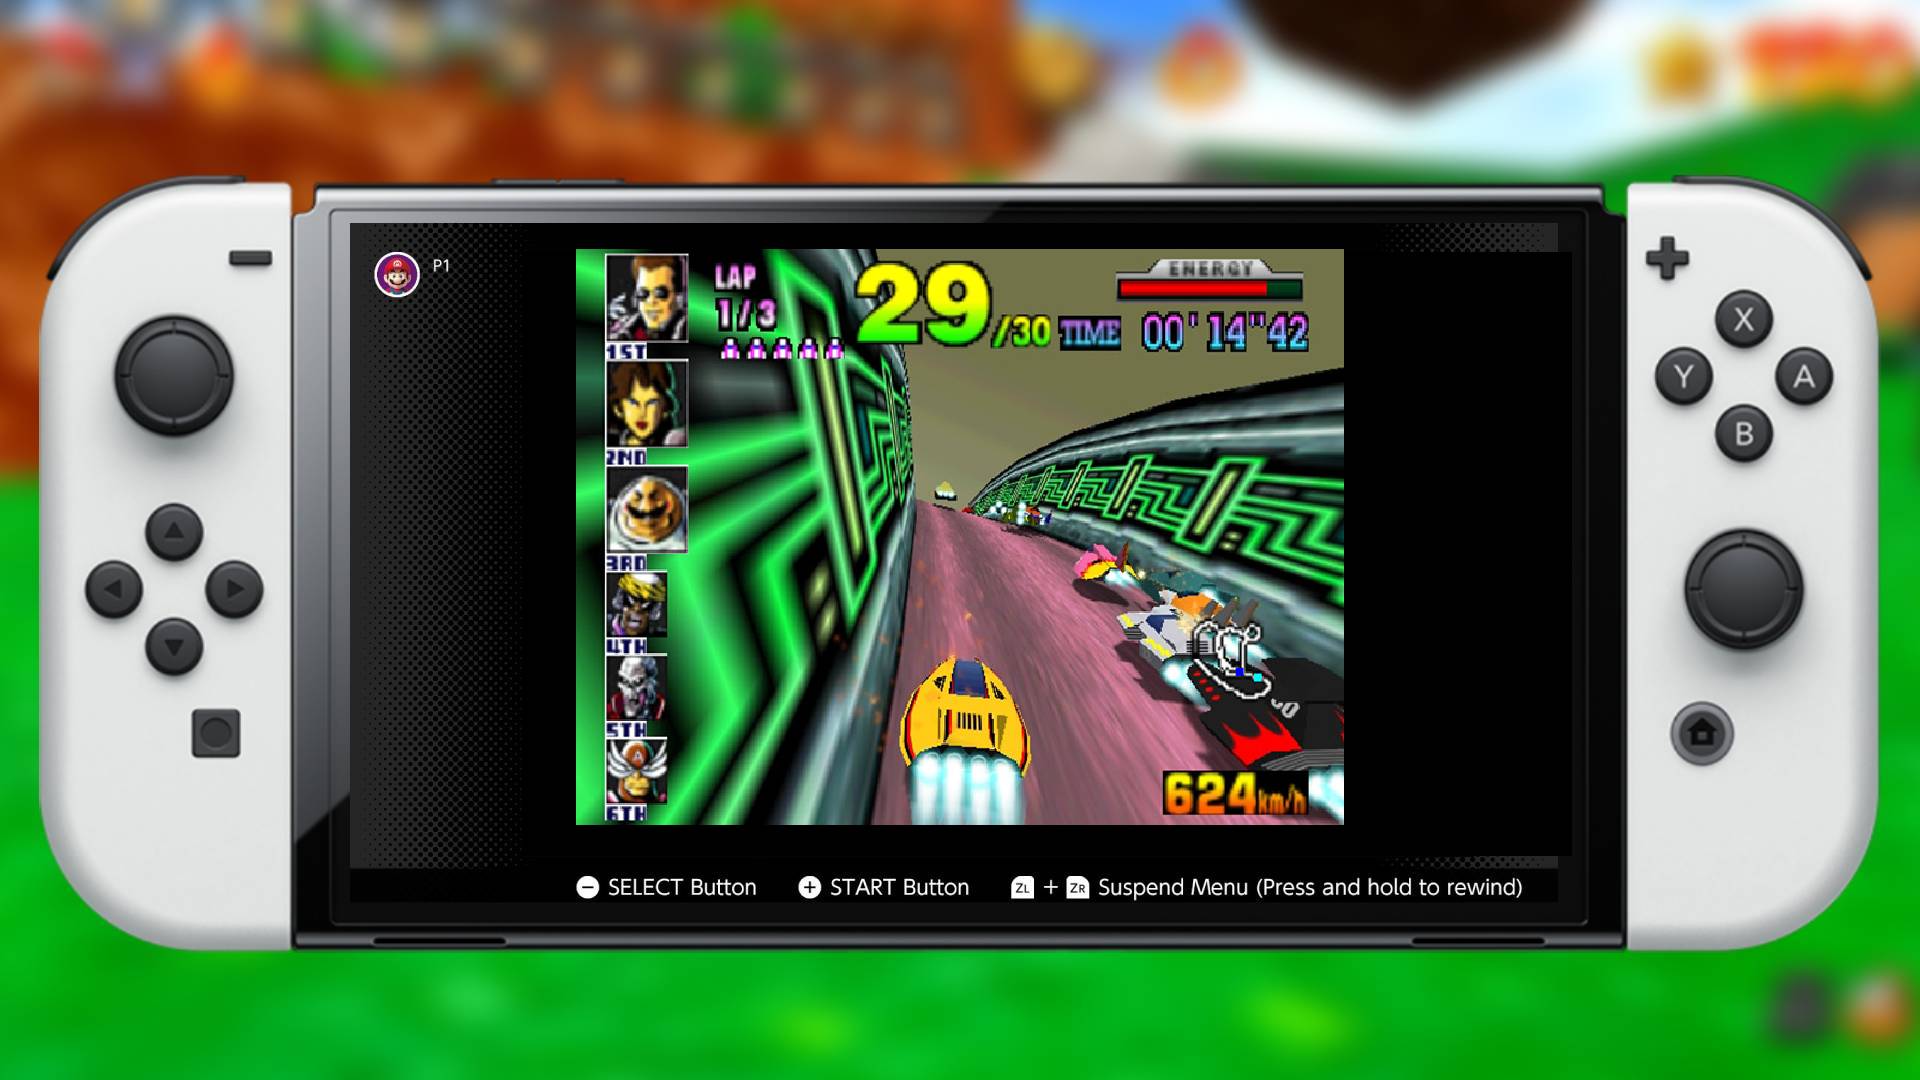 Nintendo 64 Games Are Coming To Nintendo Switch Online At An Extra Cost